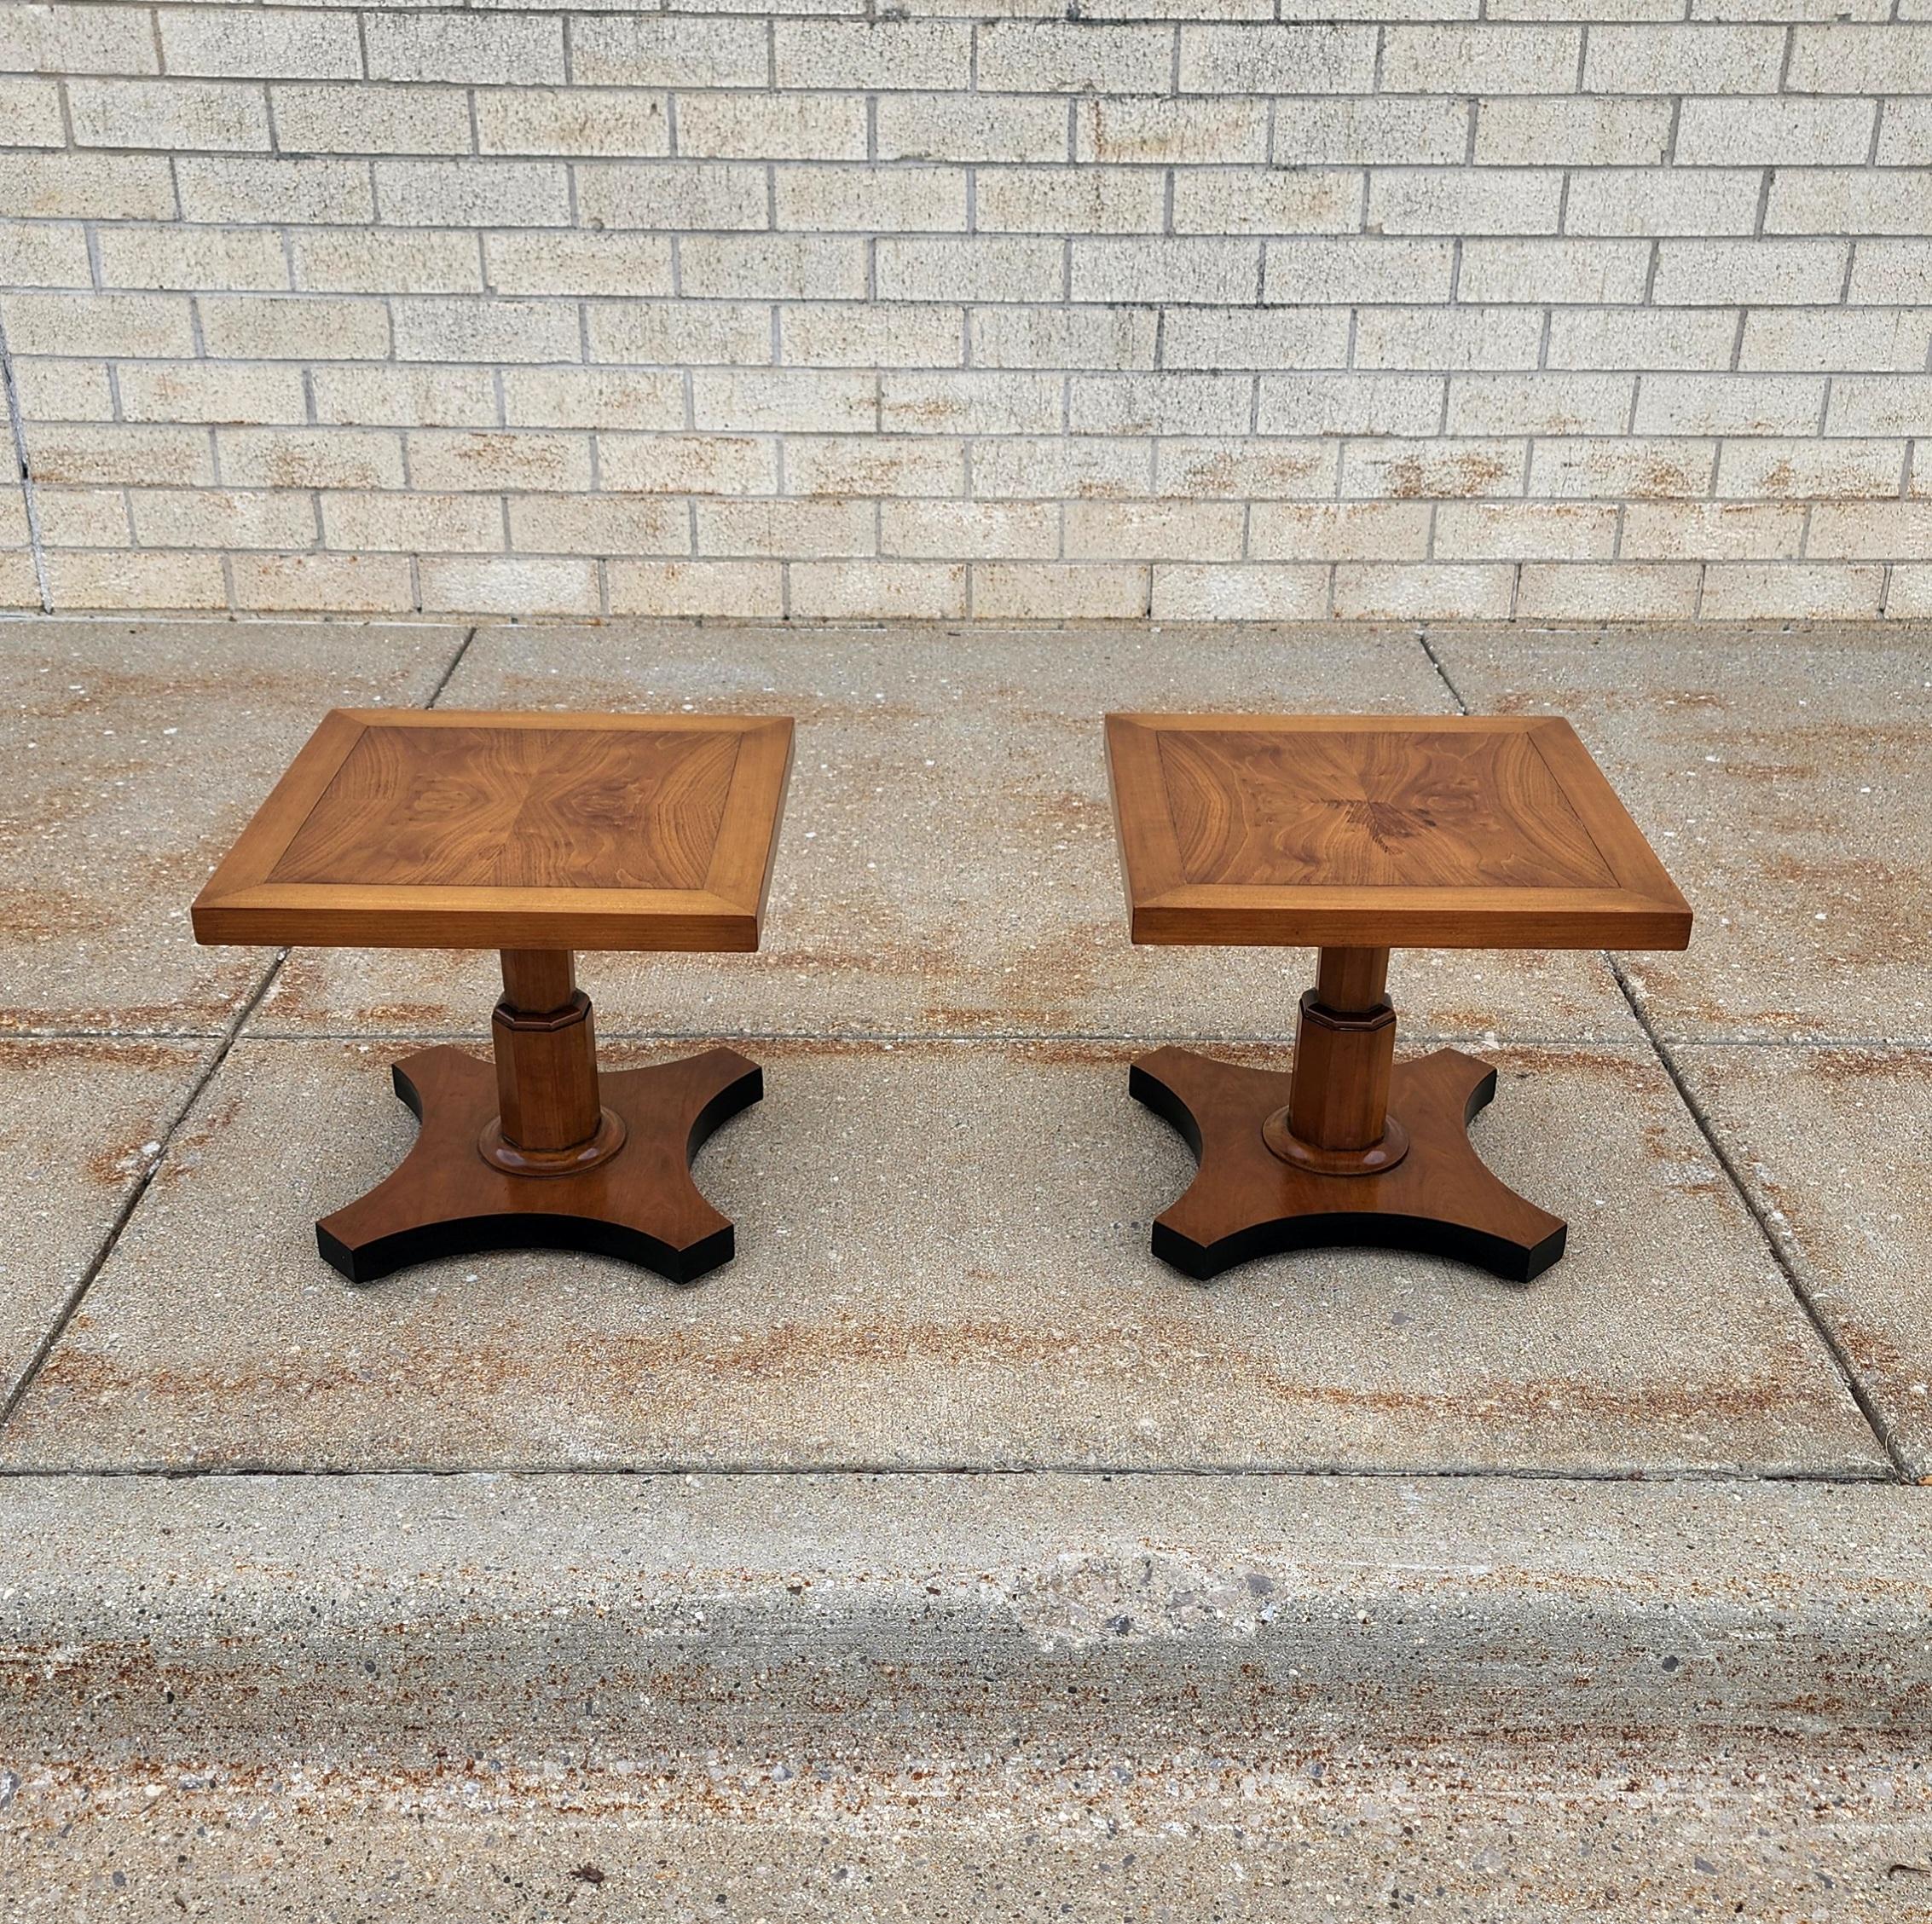 Mid-Century Modern Midcentury Burl Wood Walnut Side Tables by Baker Furniture, a Pair